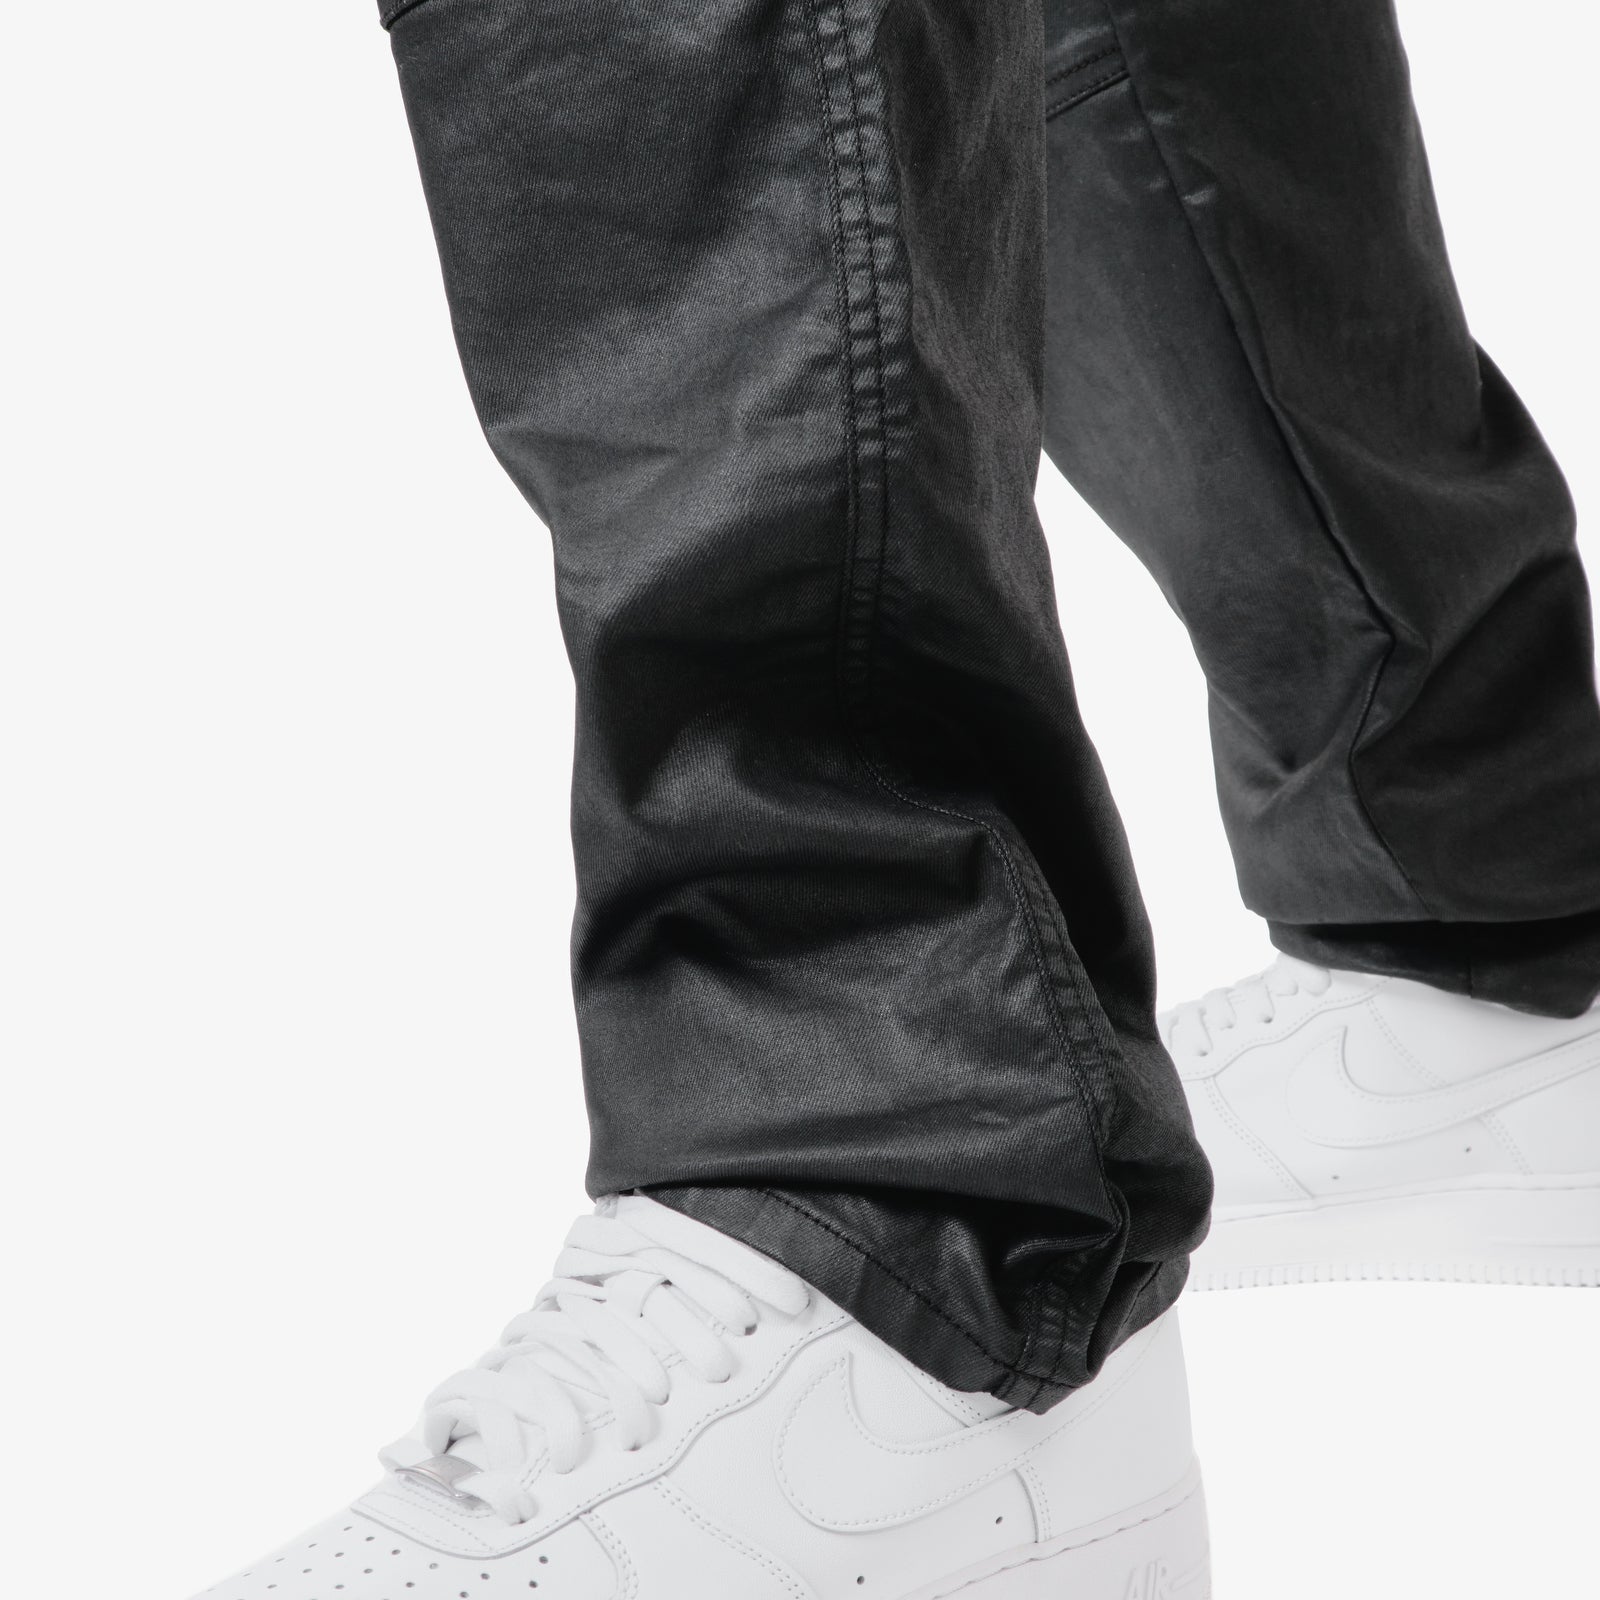 BLACK UTILITY CARGO WAX COATED JEANS